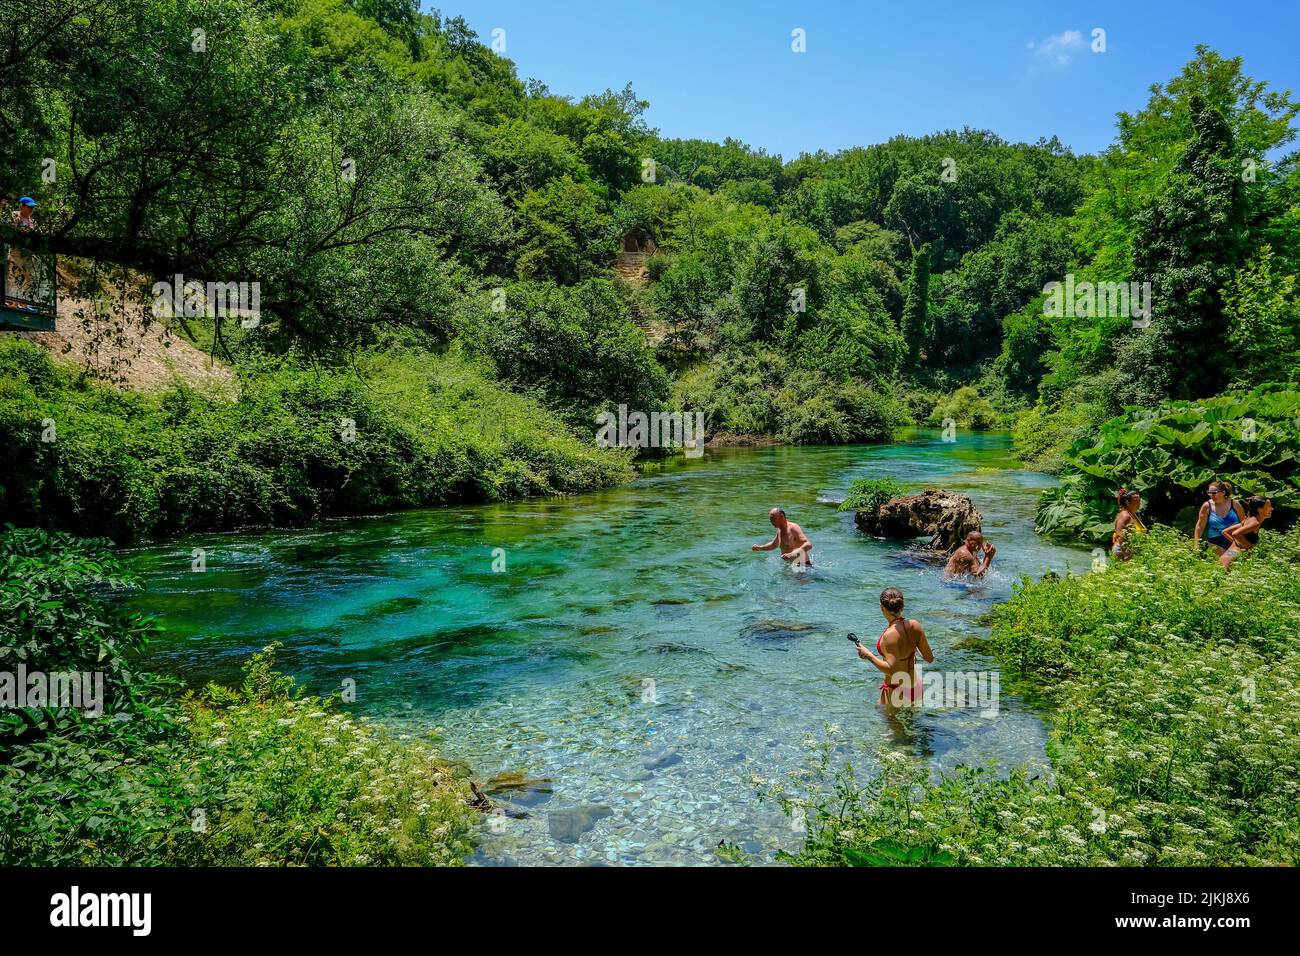 Muzina, Albania - Tourists bathe in Syri i Kaltër, THE BLUE EYE is the country's most abundant water source with 6 ö³/s, located midway between the larger cities of Saranda on the coast and Gjirokastra inland. Stock Photo